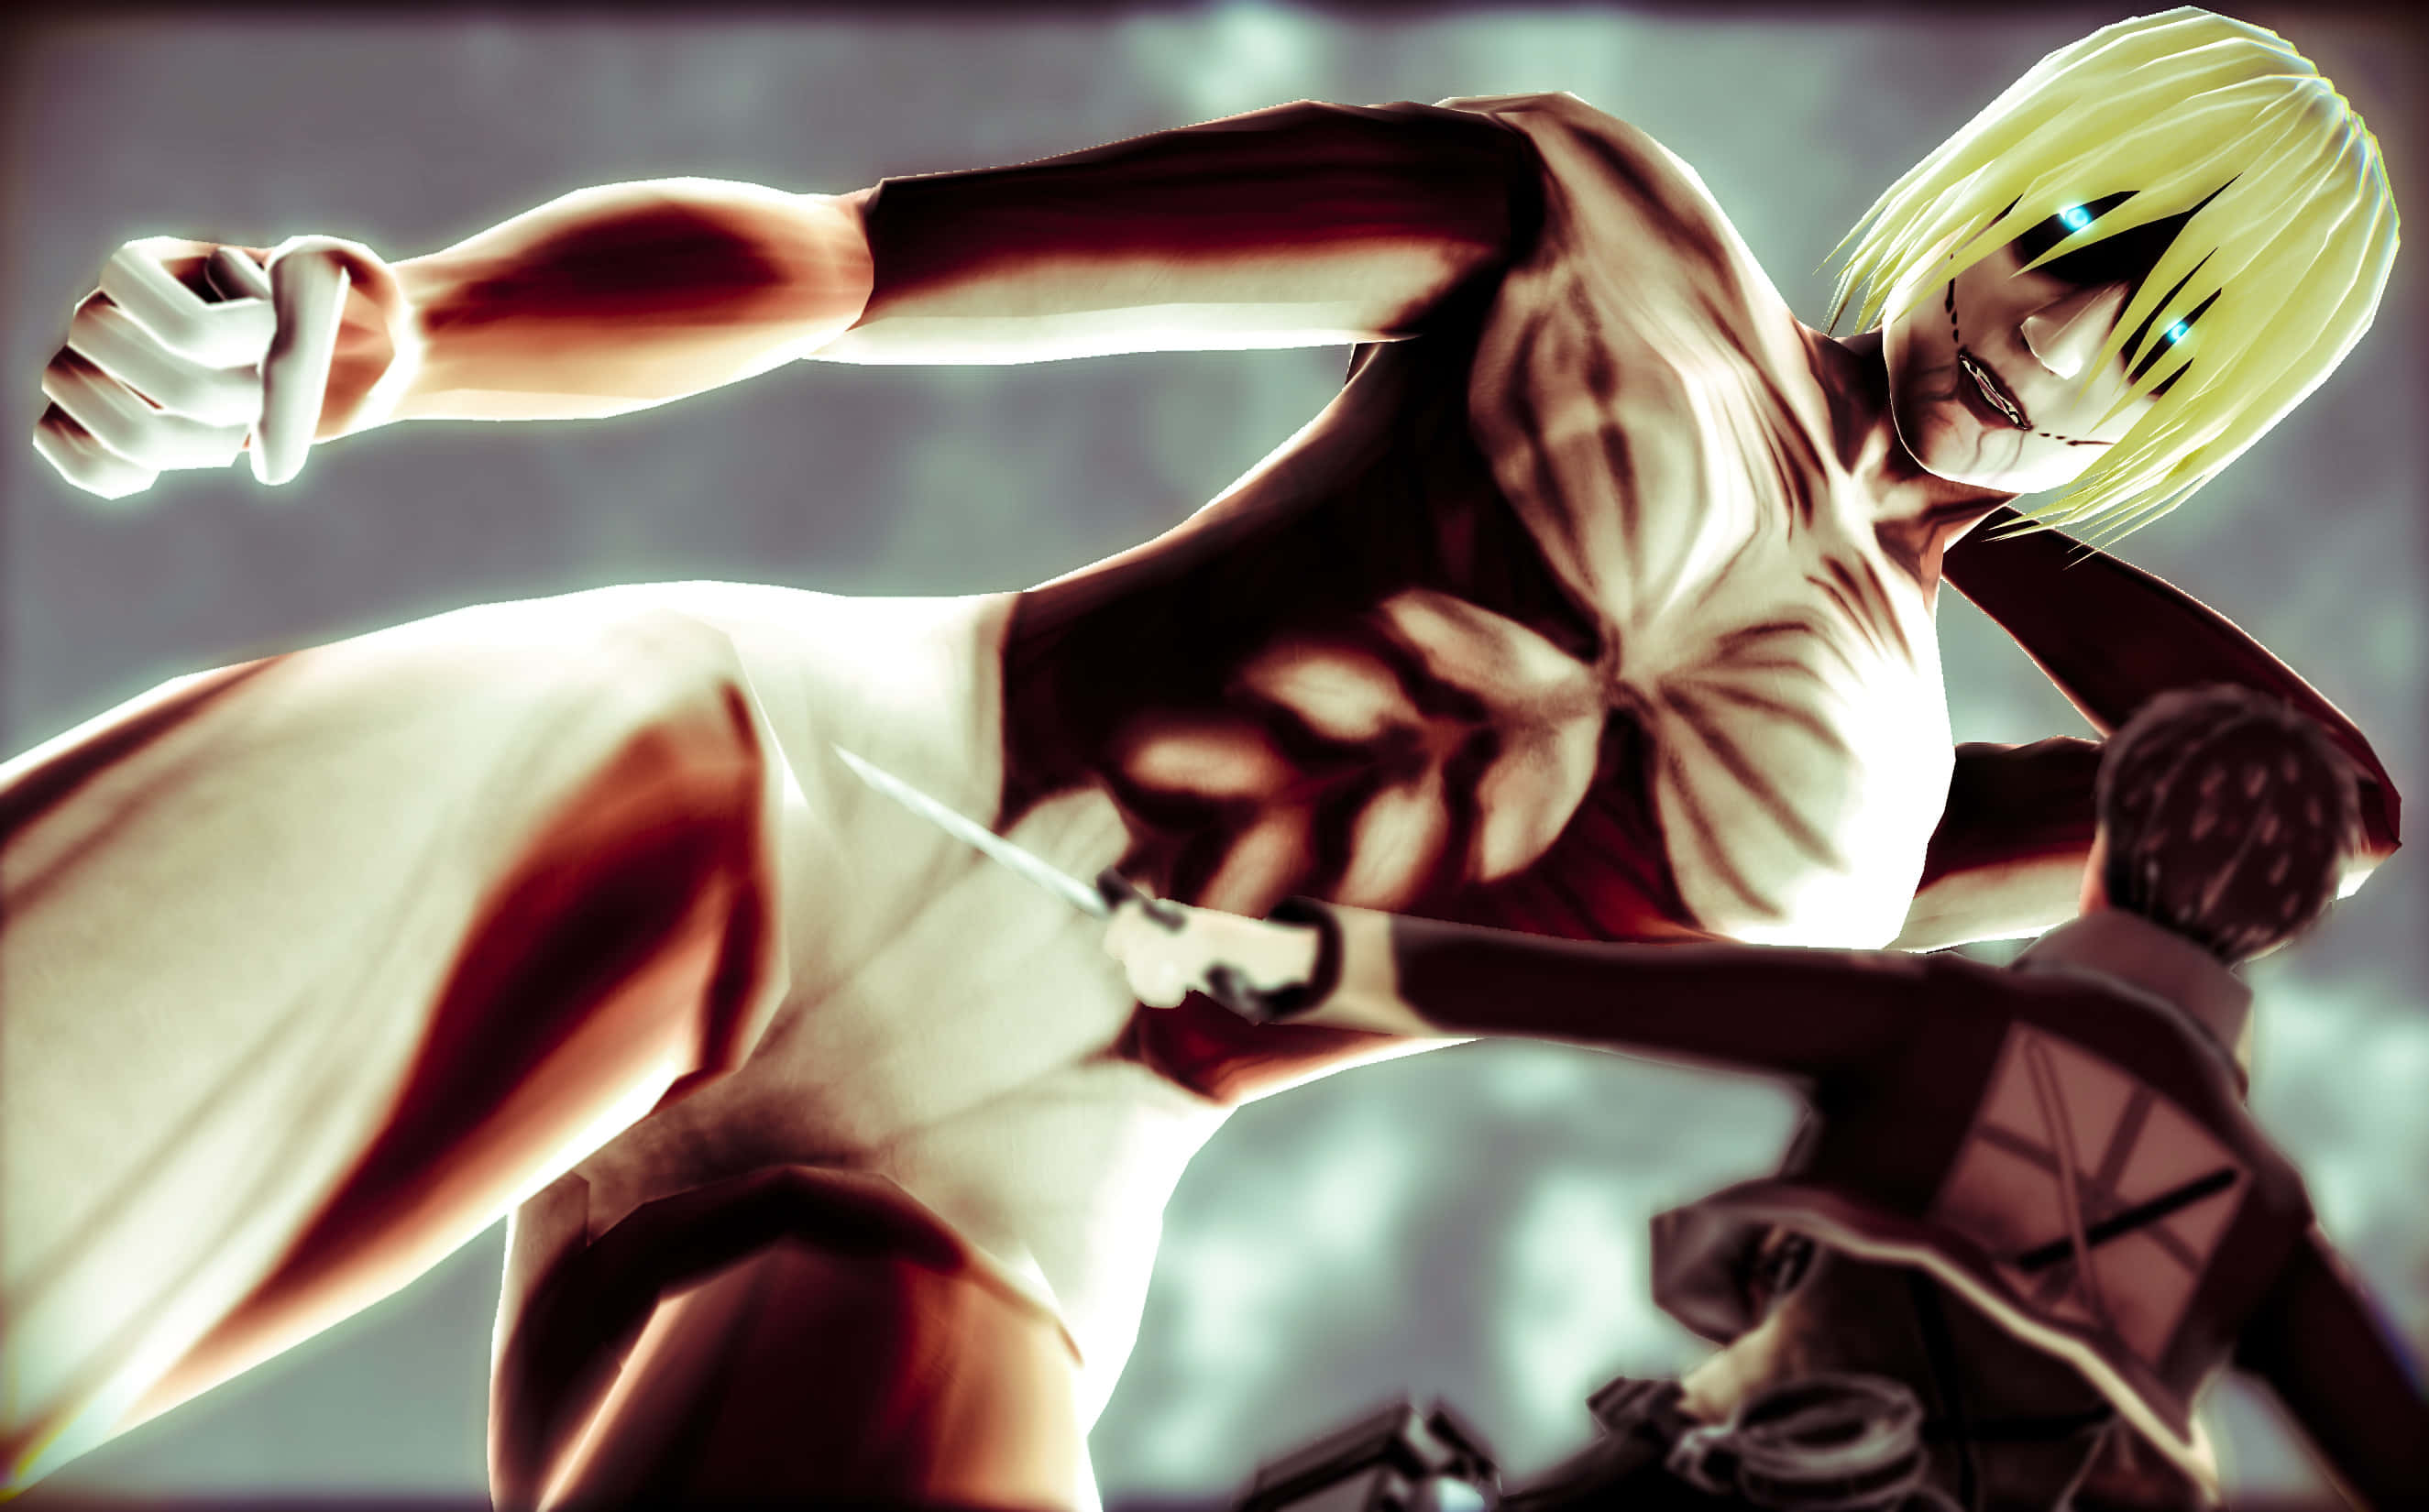 Feared by many, the Female Titan dominates the battlefield." Wallpaper